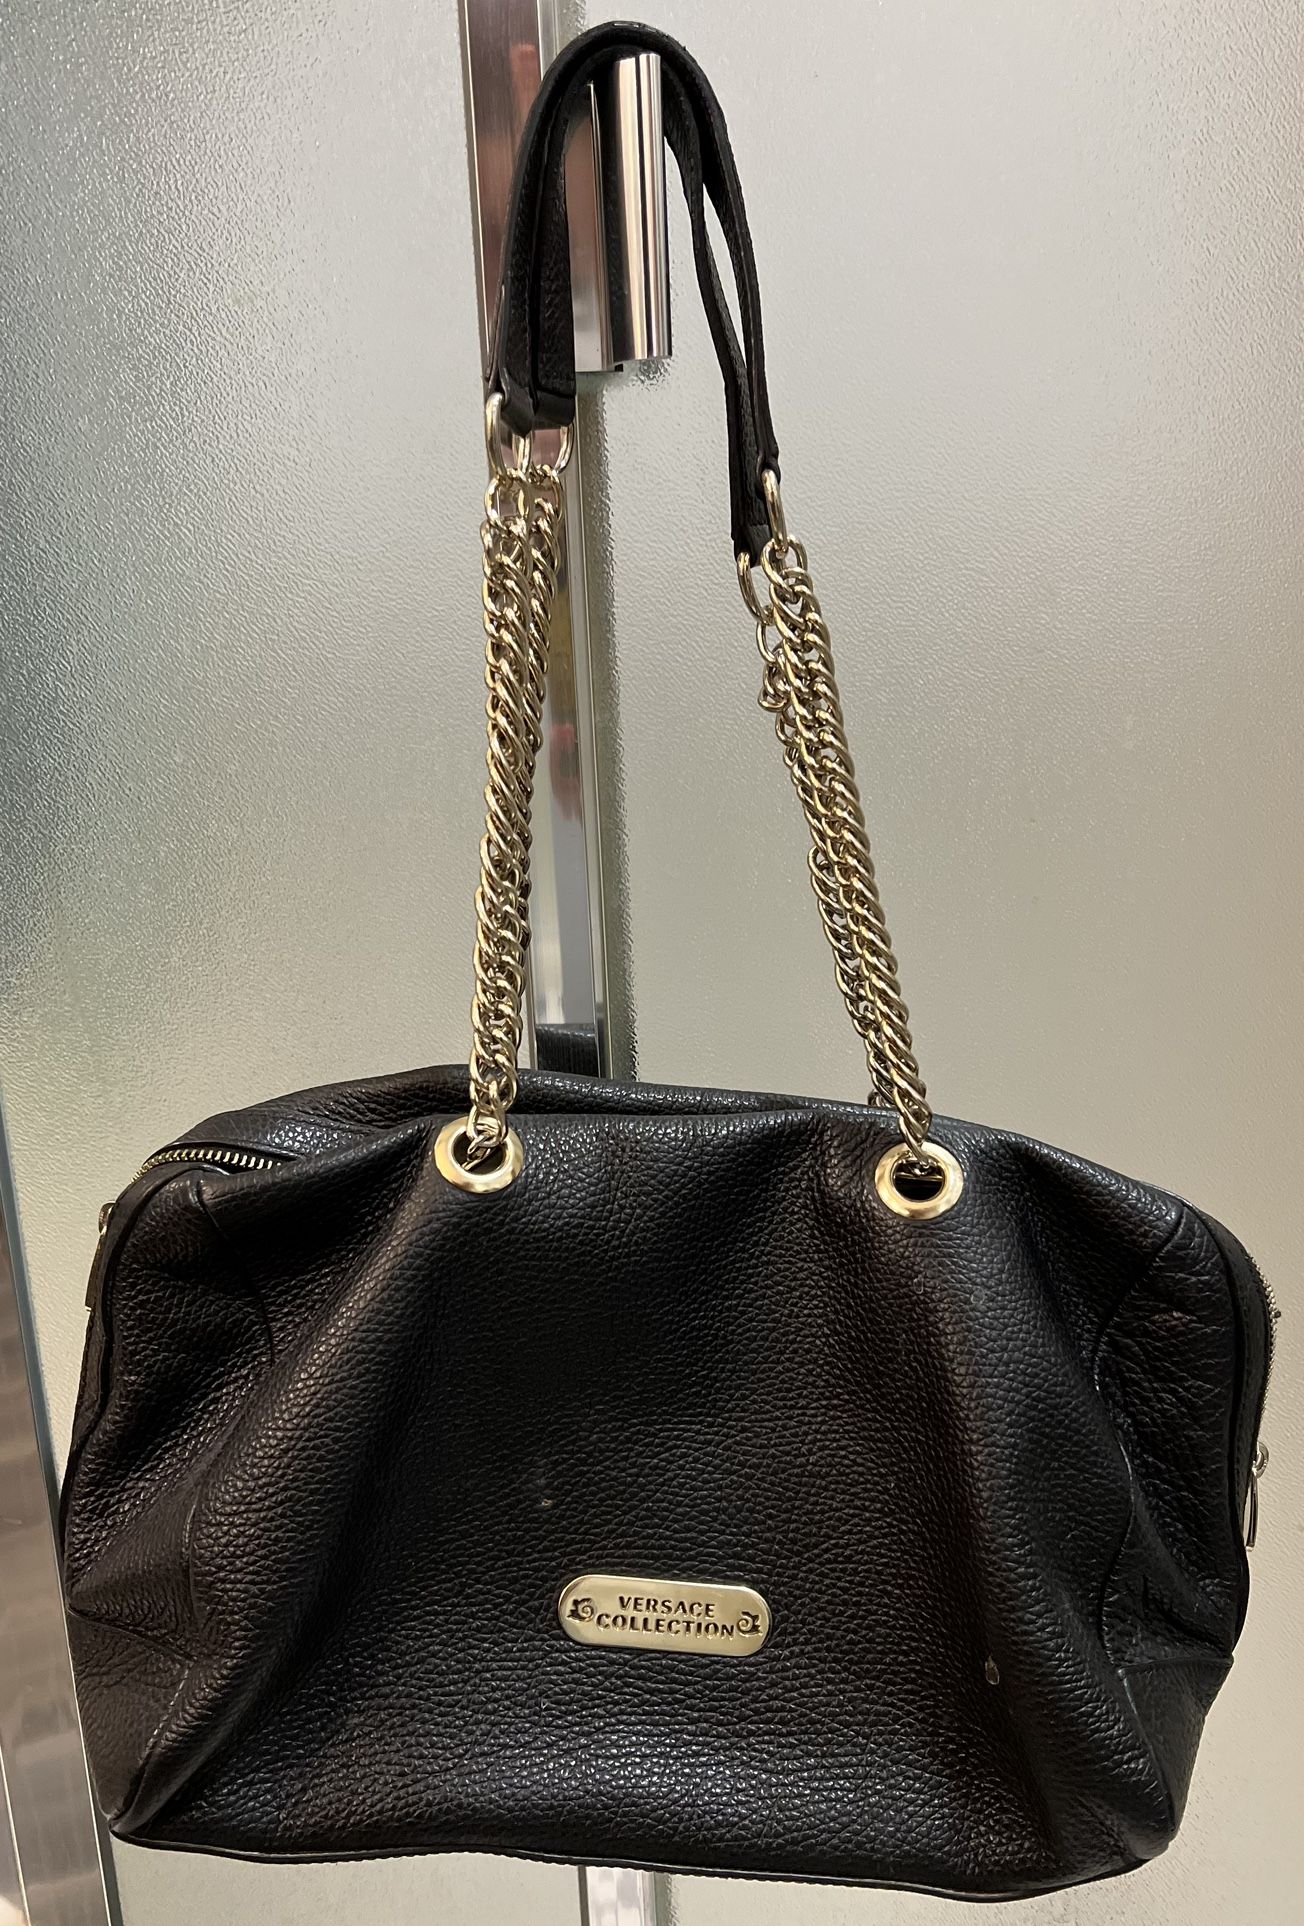 Versace collection, black leather bag